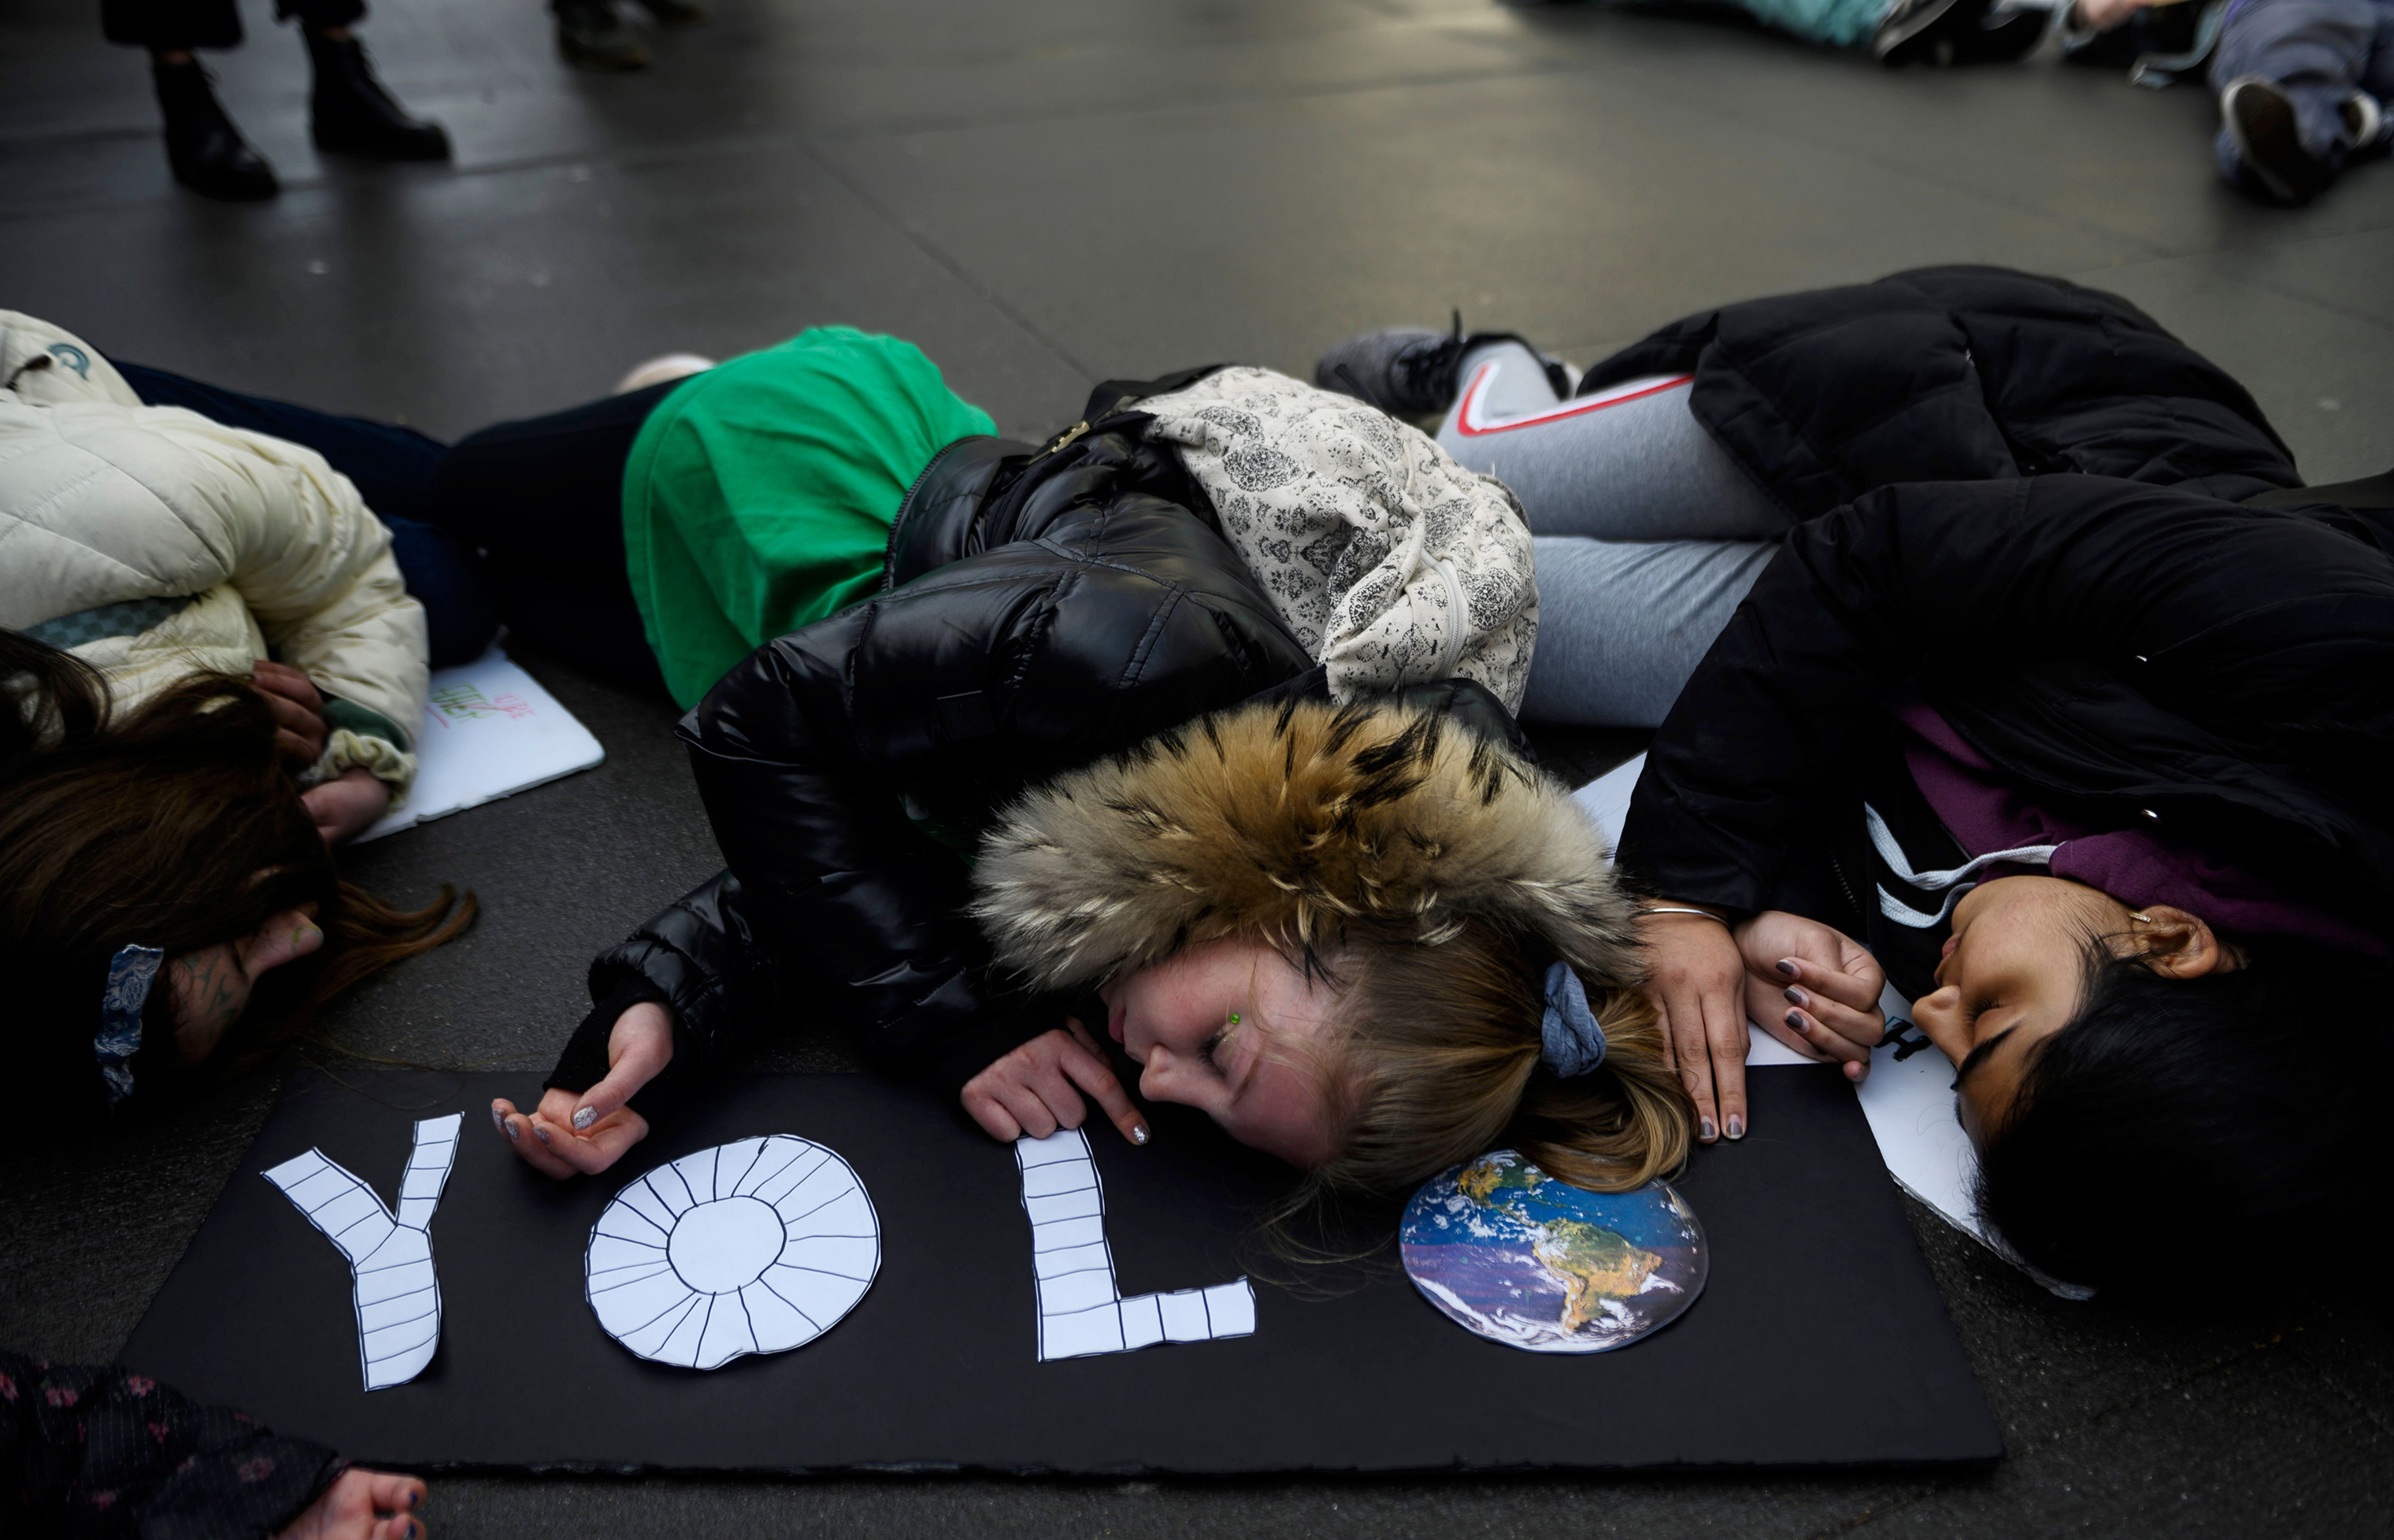 School children taking part on a die-in during a Youth Climate Strike in front of the New York Headquarters of the United Nations on March 15, 2019 in New York City. (Johannes Eisele—AFP/Getty Images)